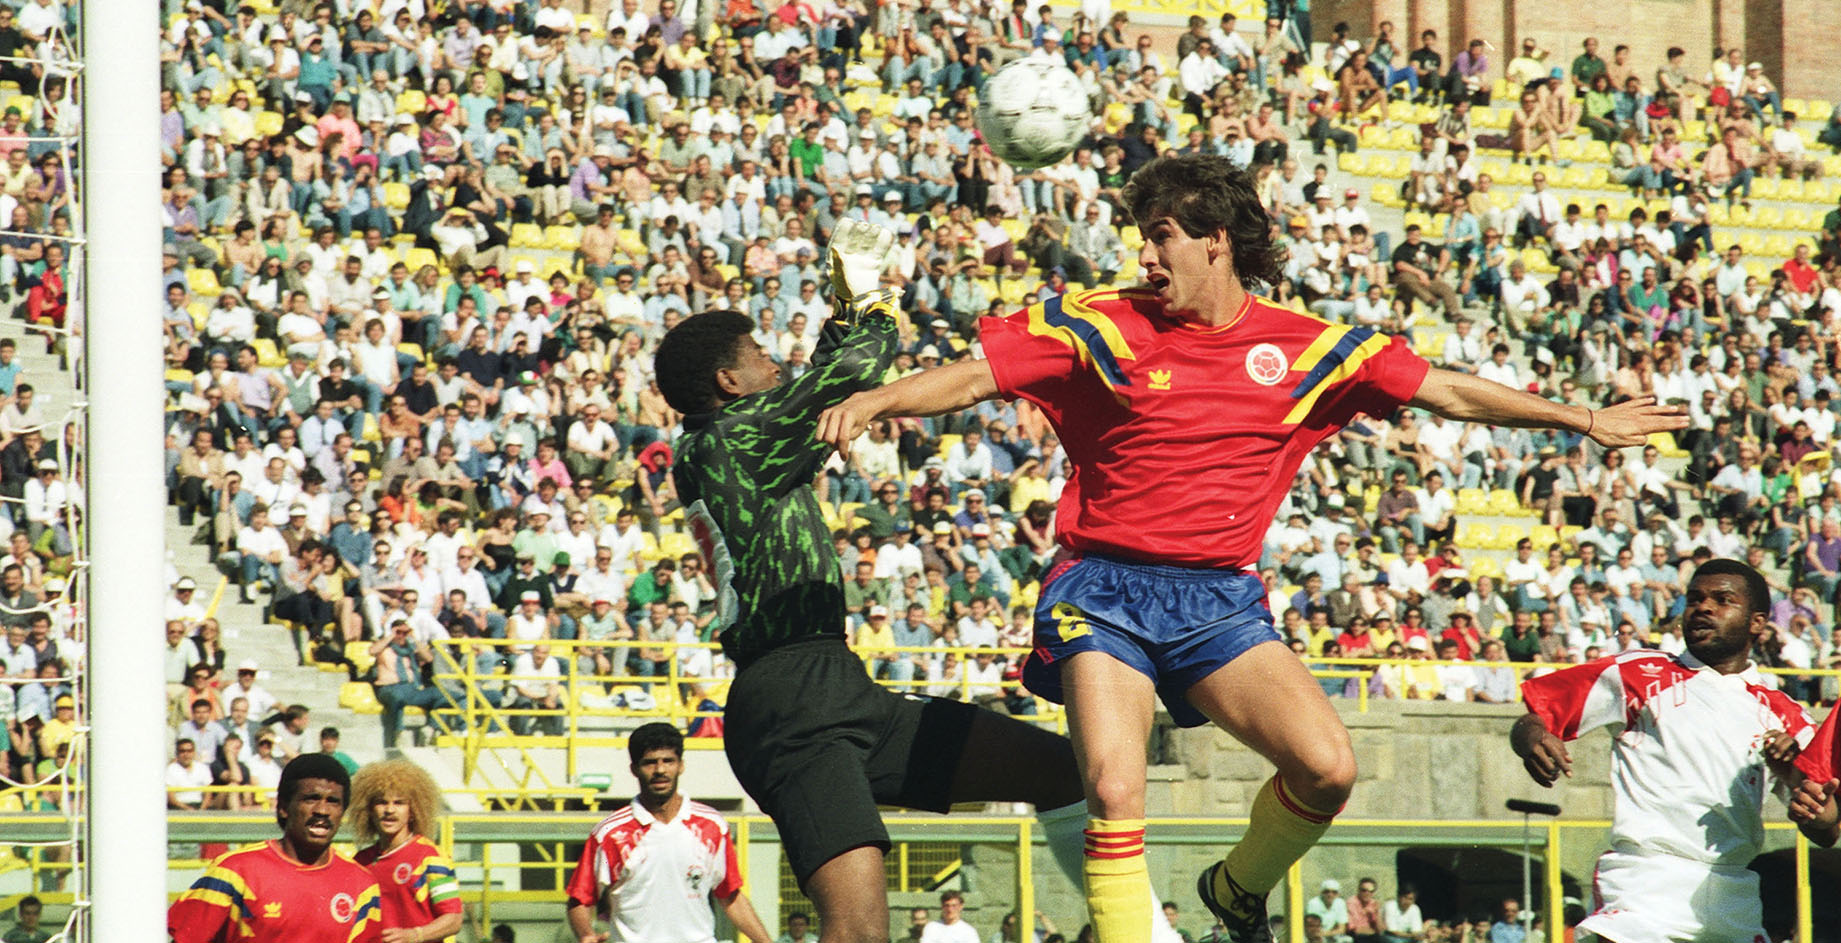 Andrés Escobar rises above a goalie for a header shot as part of the Colombian national team. (Photo courtesy of All Rise Films.)